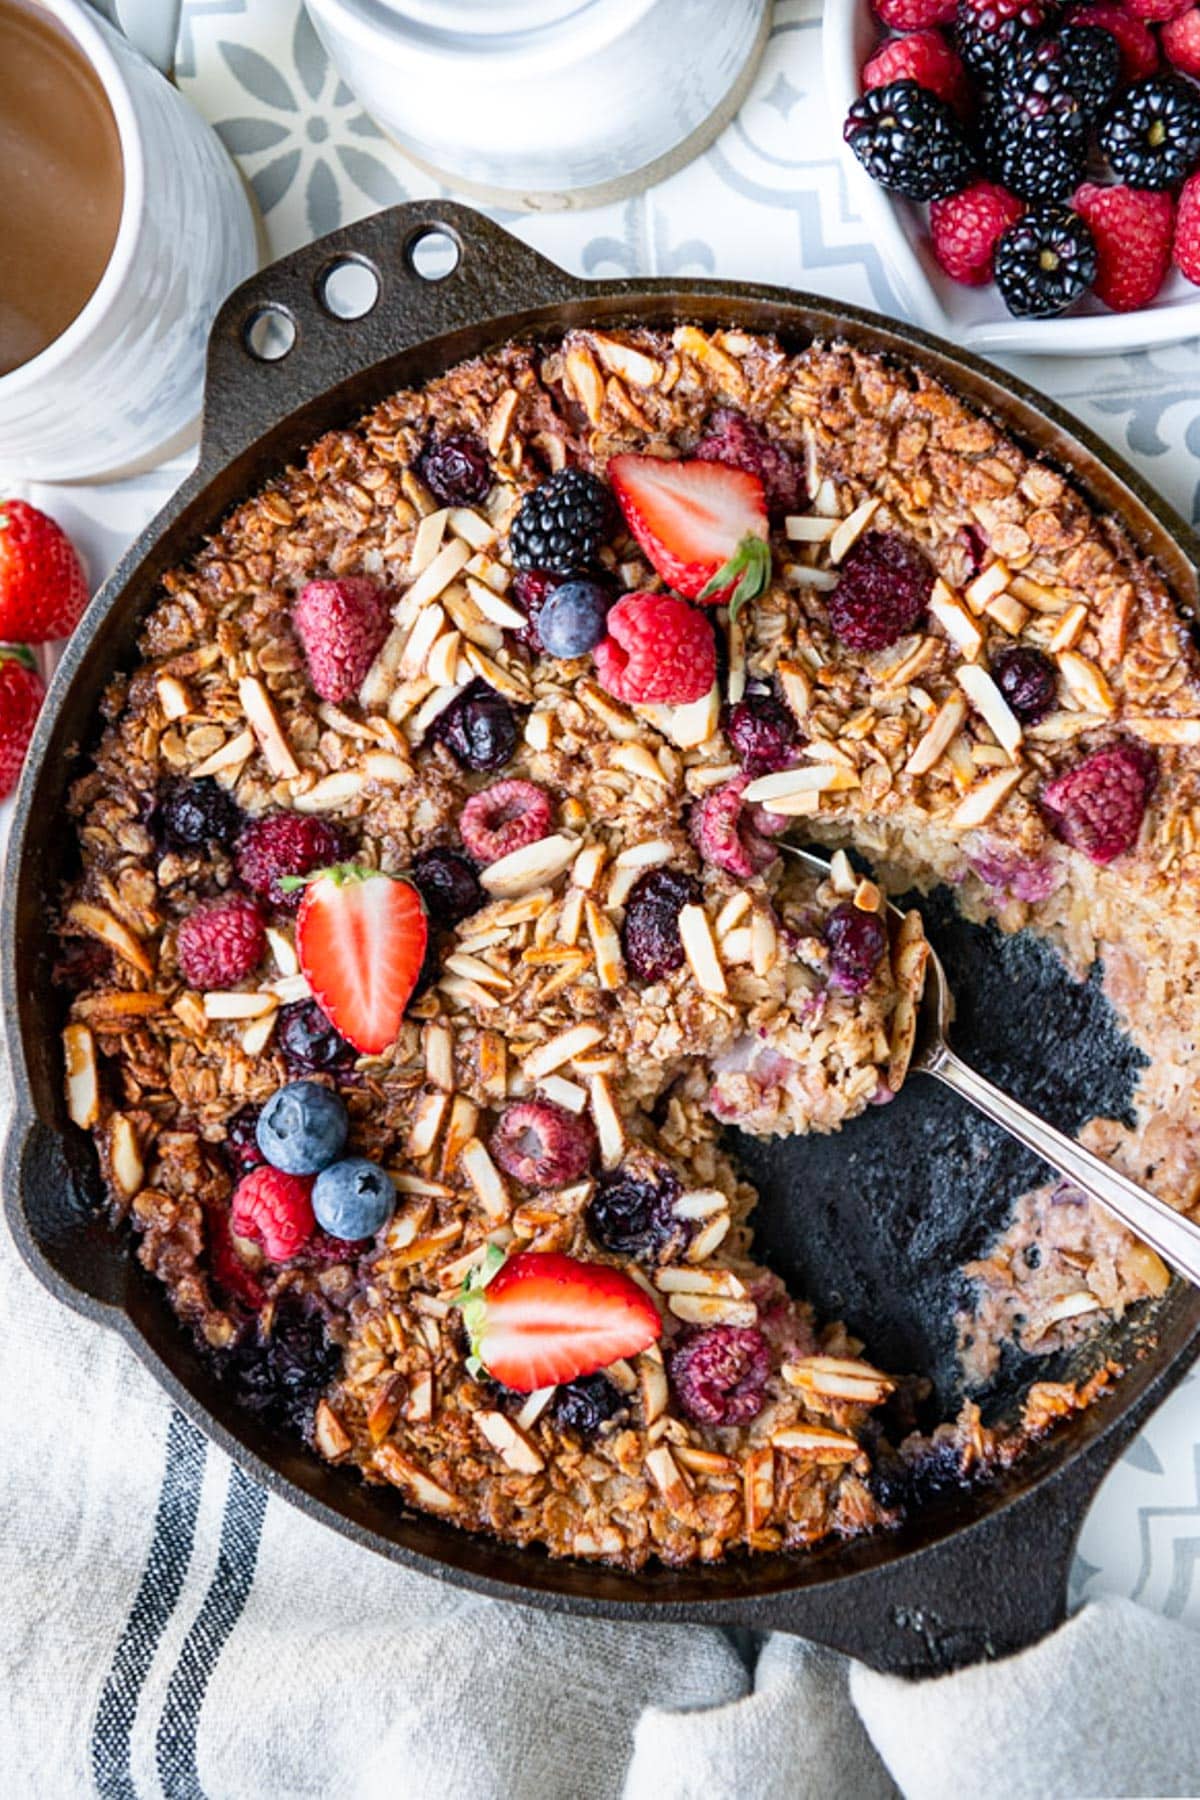 Overhead shot of baked oatmeal with berries in a cast iron skillet.